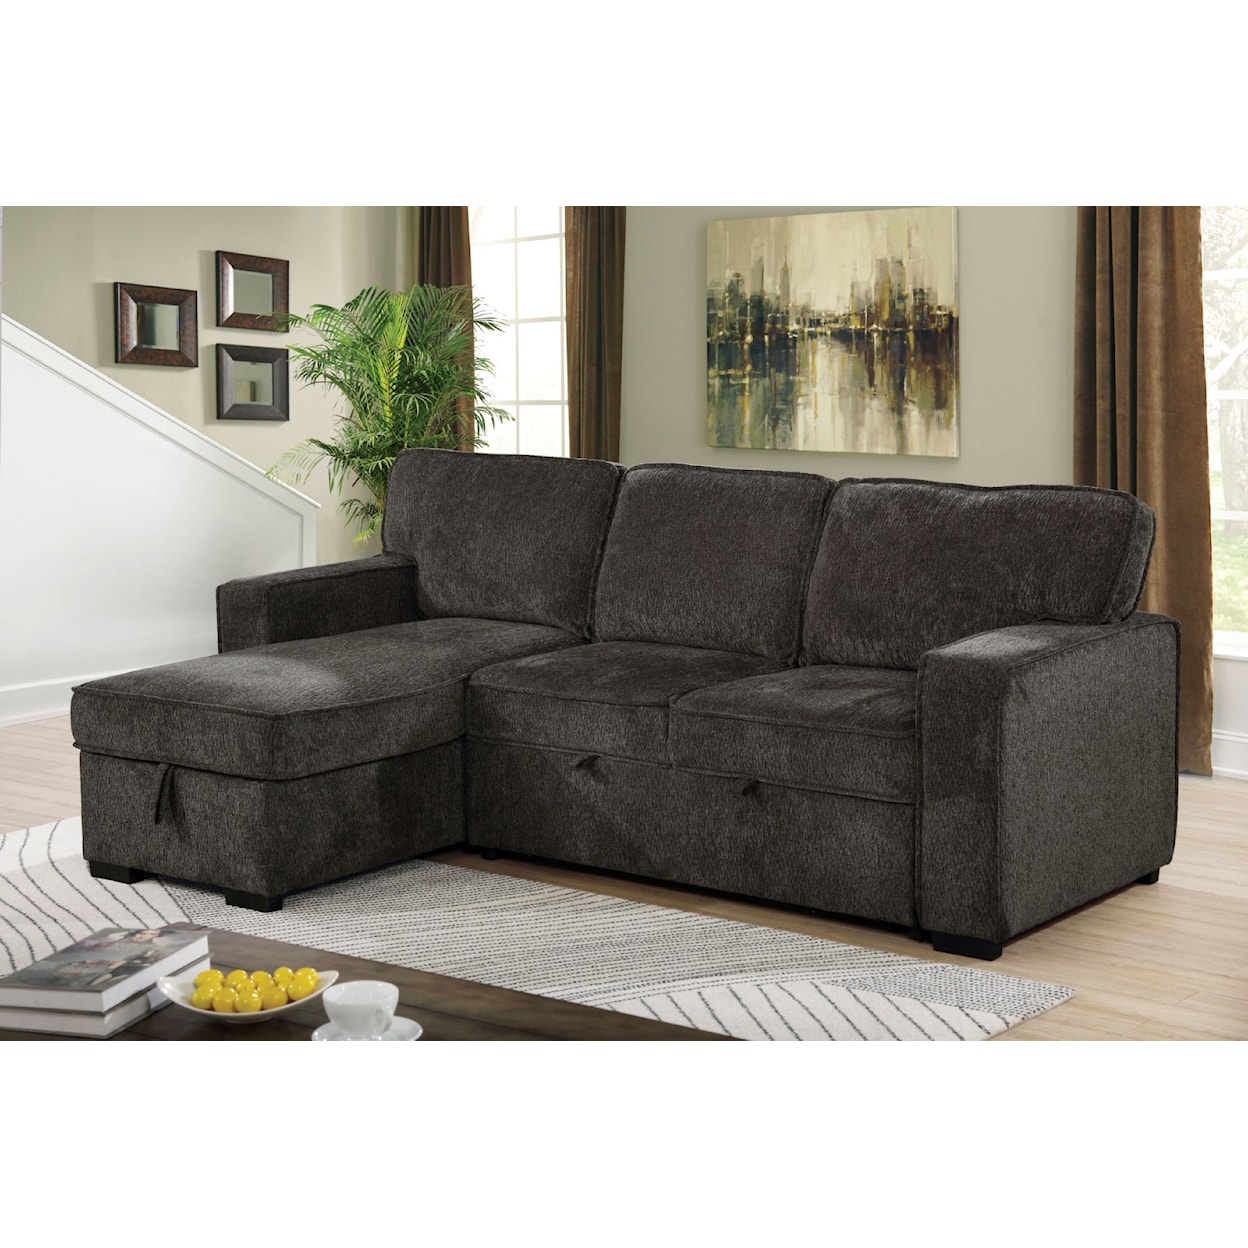 Furniture of America Ines Sectional